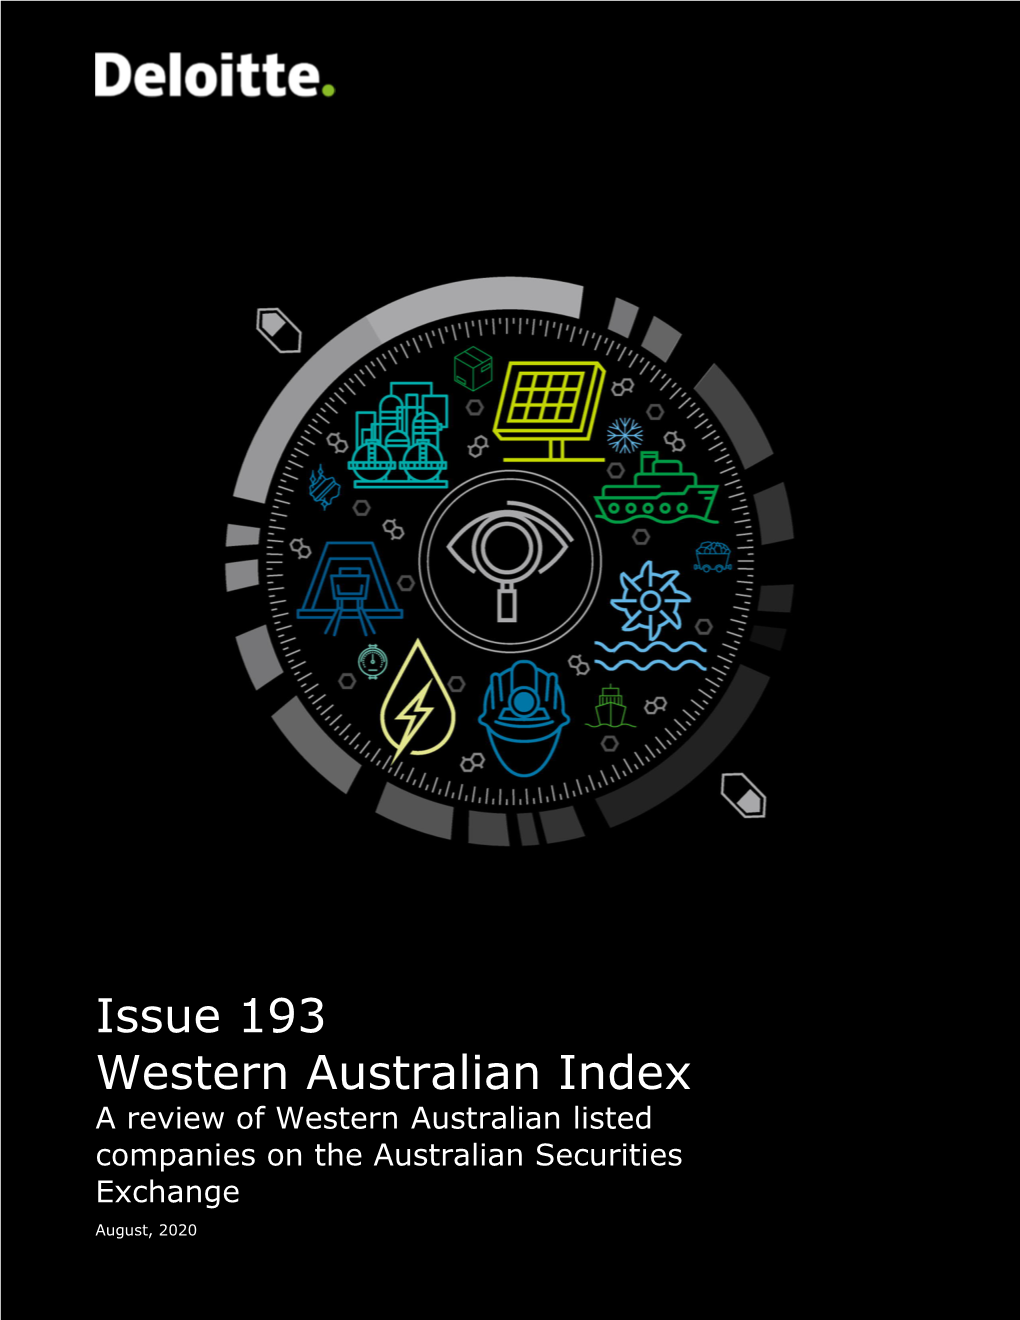 Issue 193 Western Australian Index a Review of Western Australian Listed Companies on the Australian Securities Exchange August, 2020